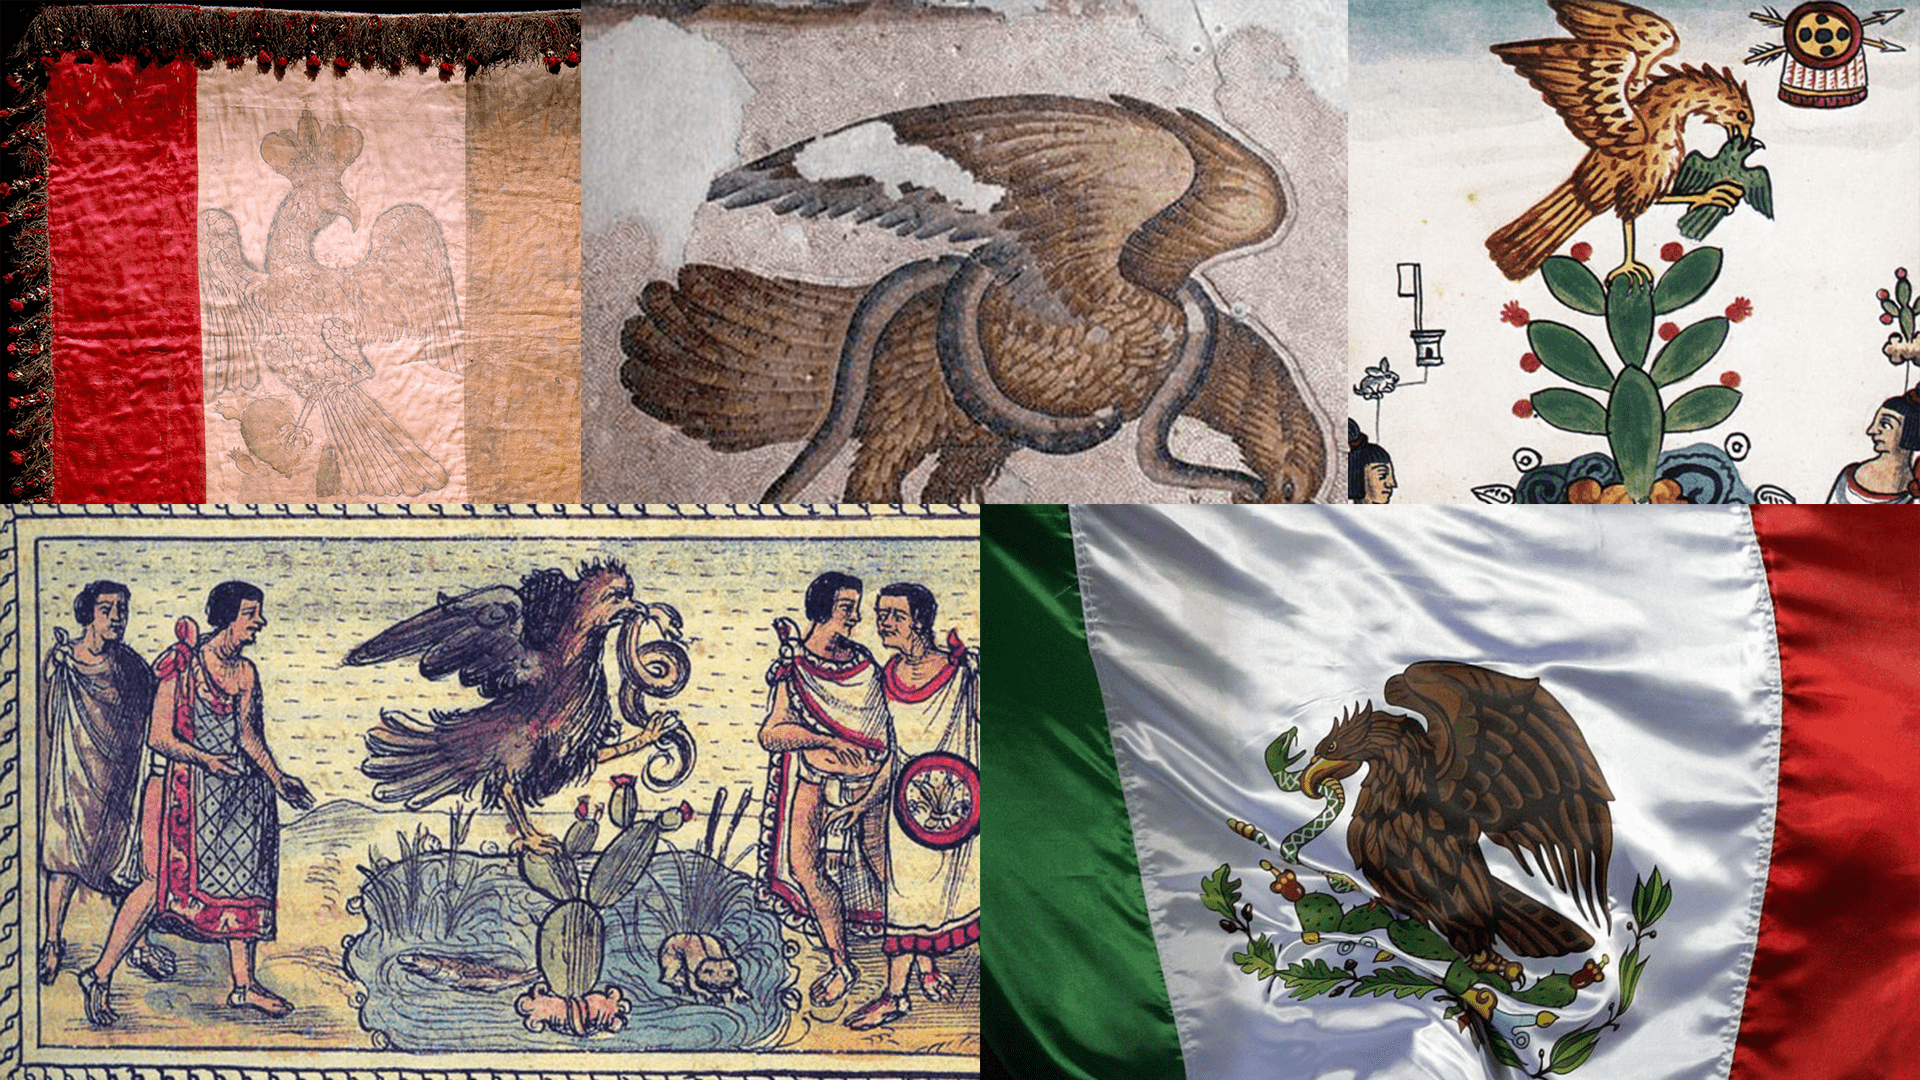 What Do The Colors And Symbols Of The Mexican Flag Mean? - WorldAtlas